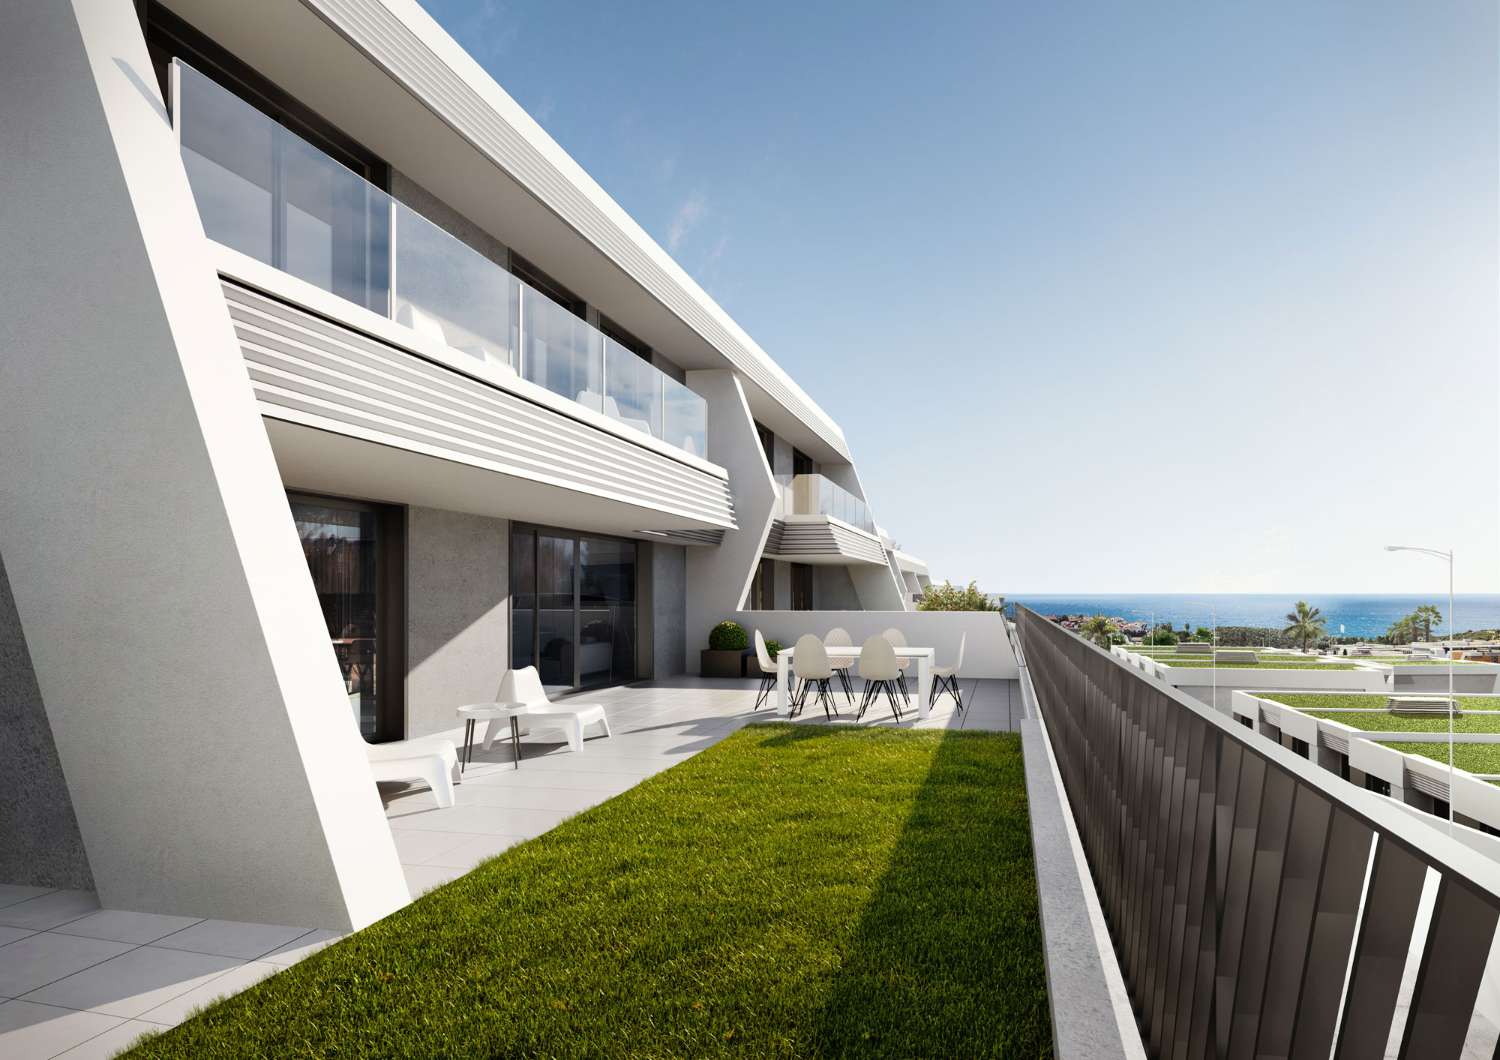 Exclusive luxury townhouses with panoramic sea views in the Chaparral natural park, Mijas Costa